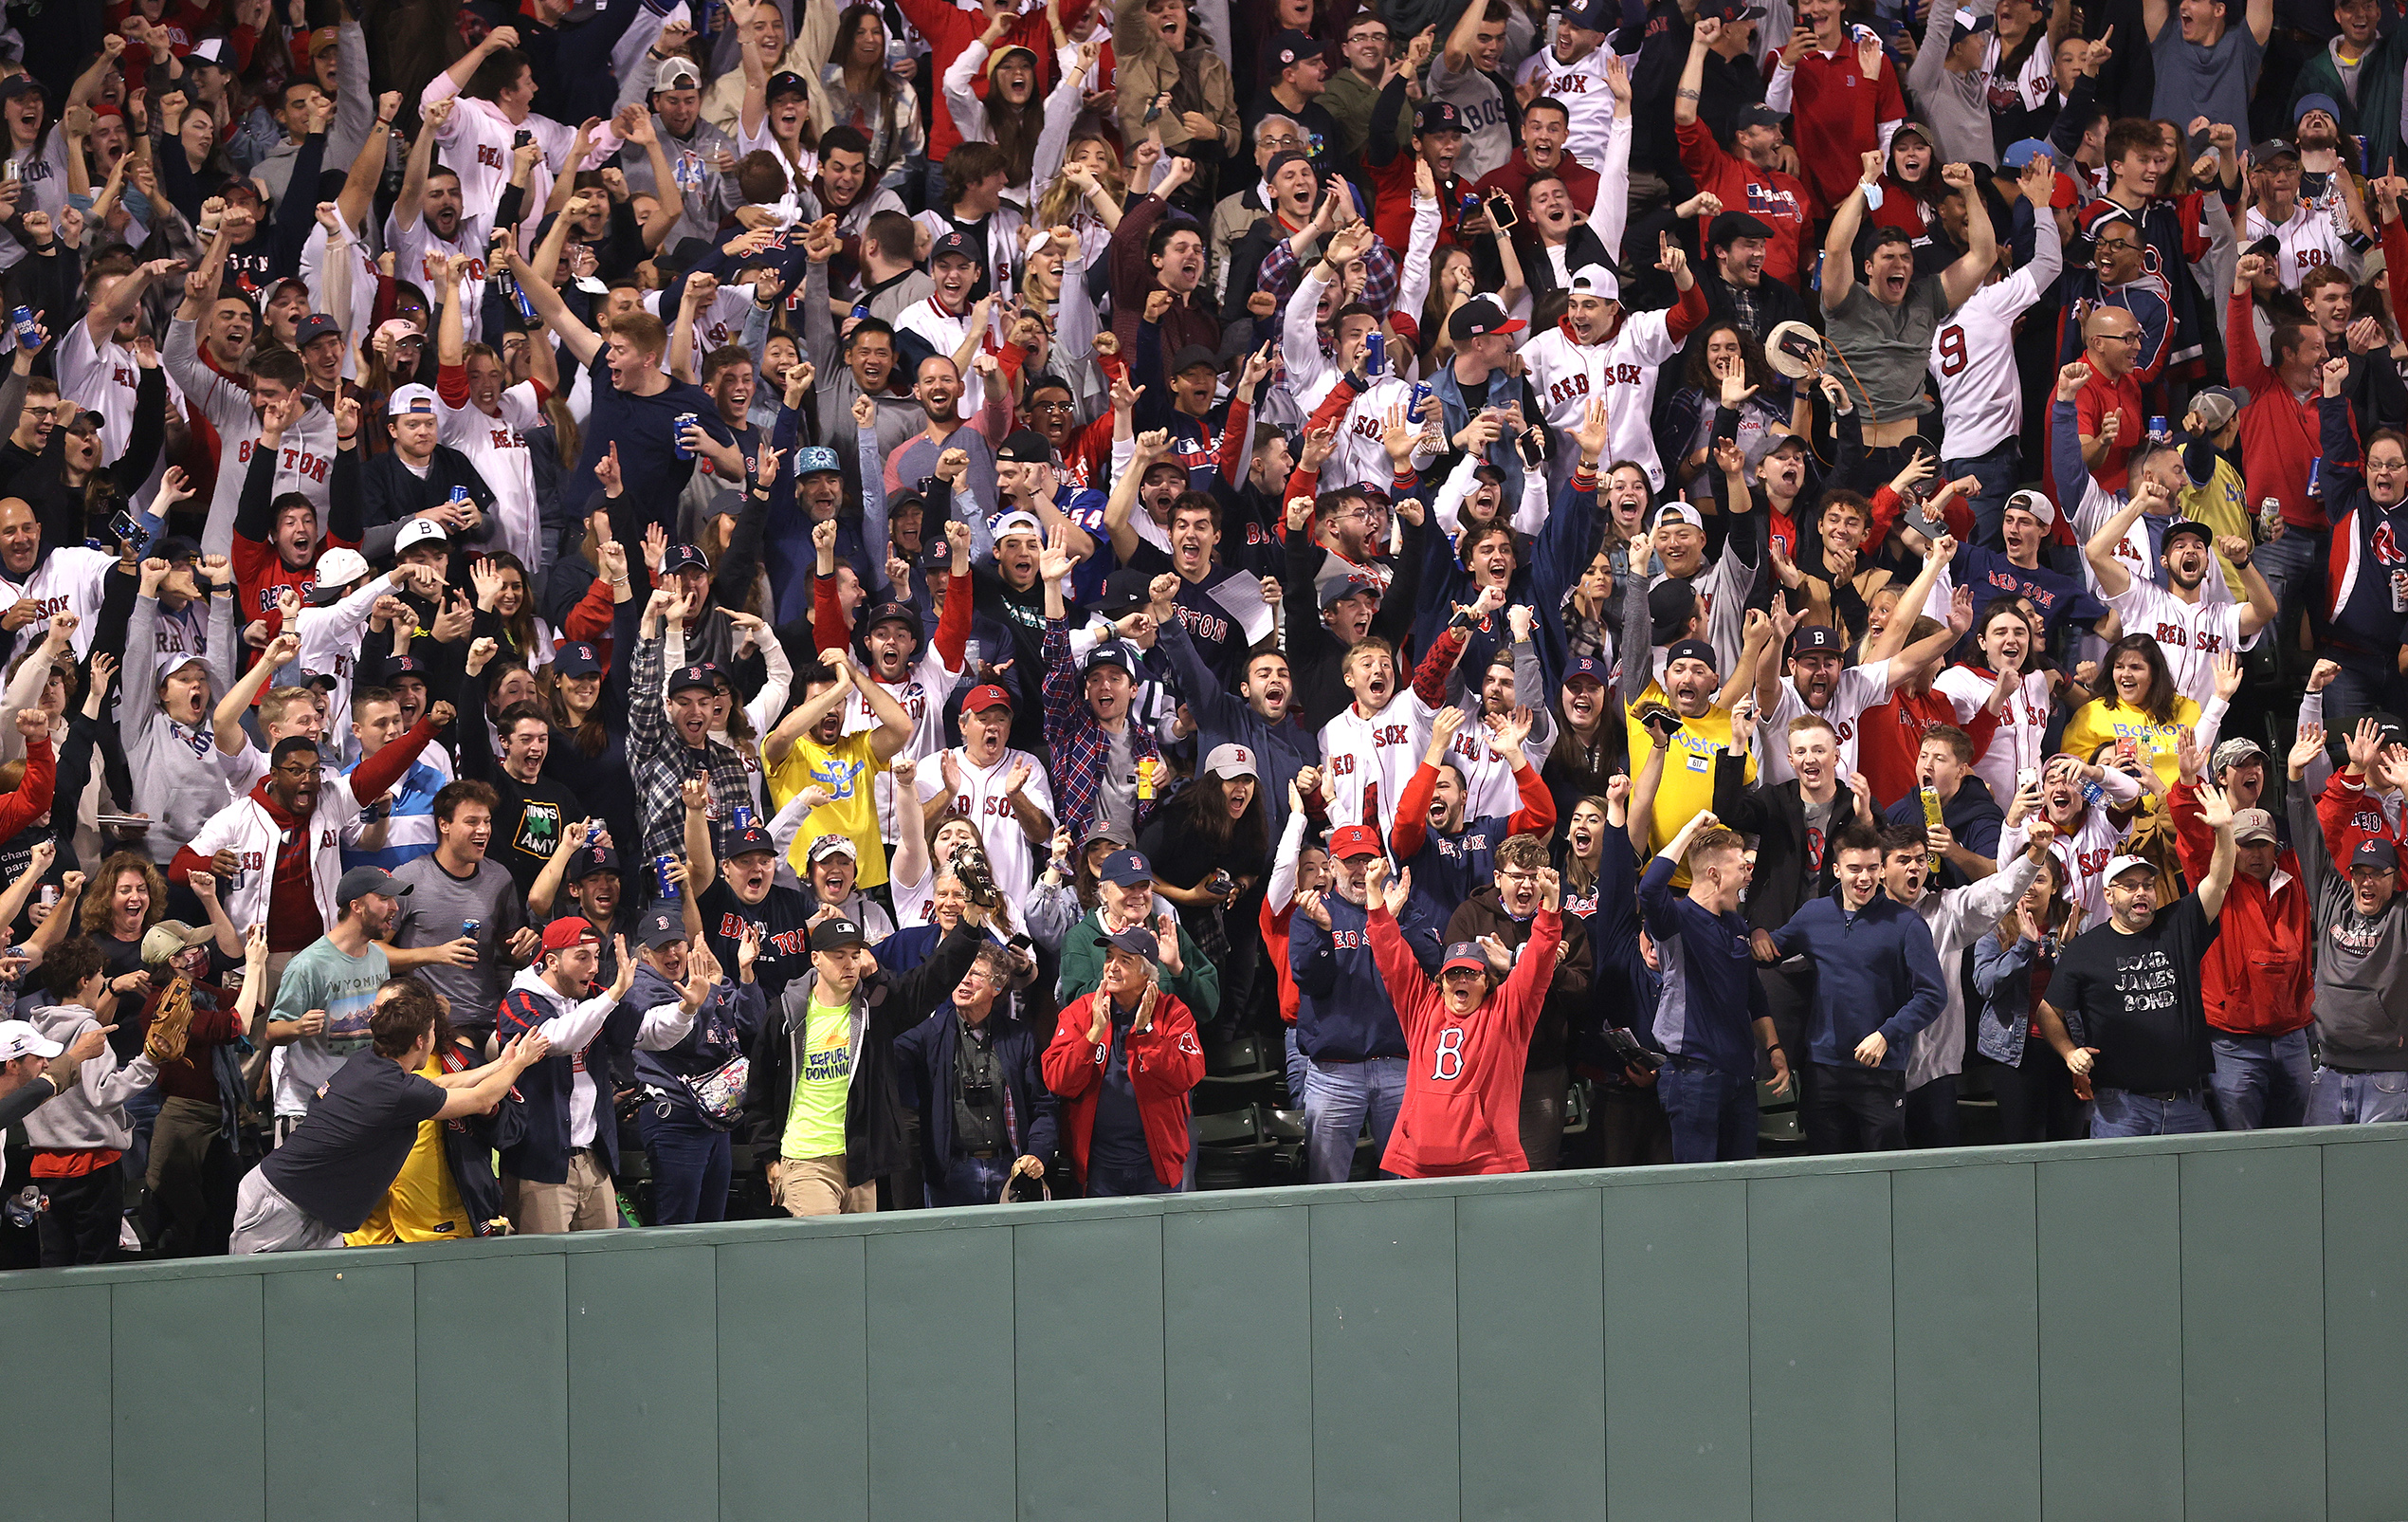 Yawkey Way, Where Red Sox Fans Converge, Will Be Renamed Over